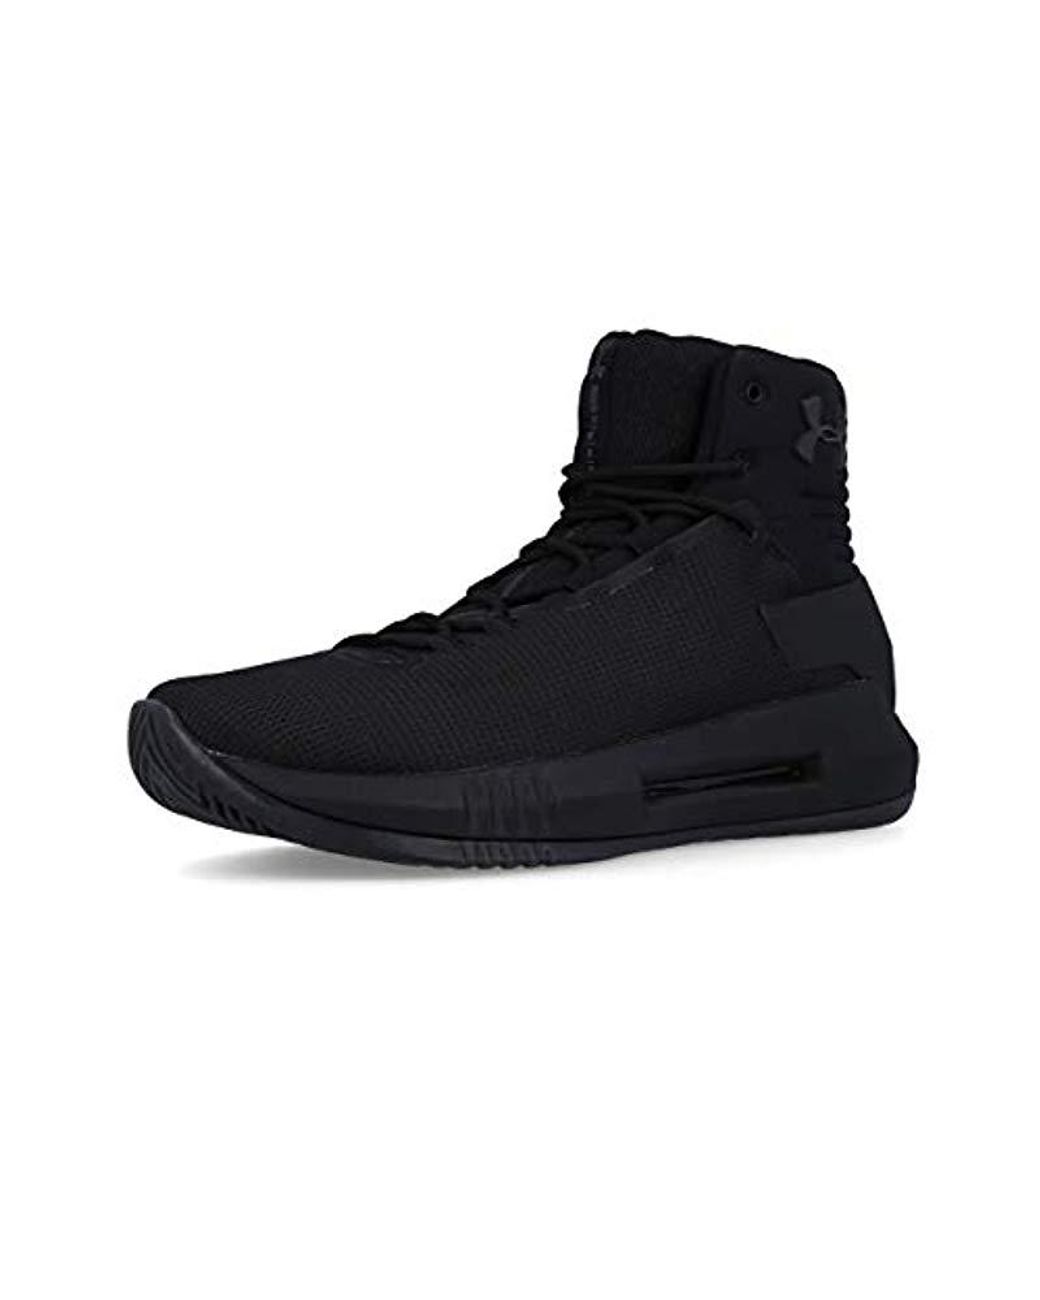 Under Armour Ua Drive 4 Basketball Shoes Black for Men | Lyst